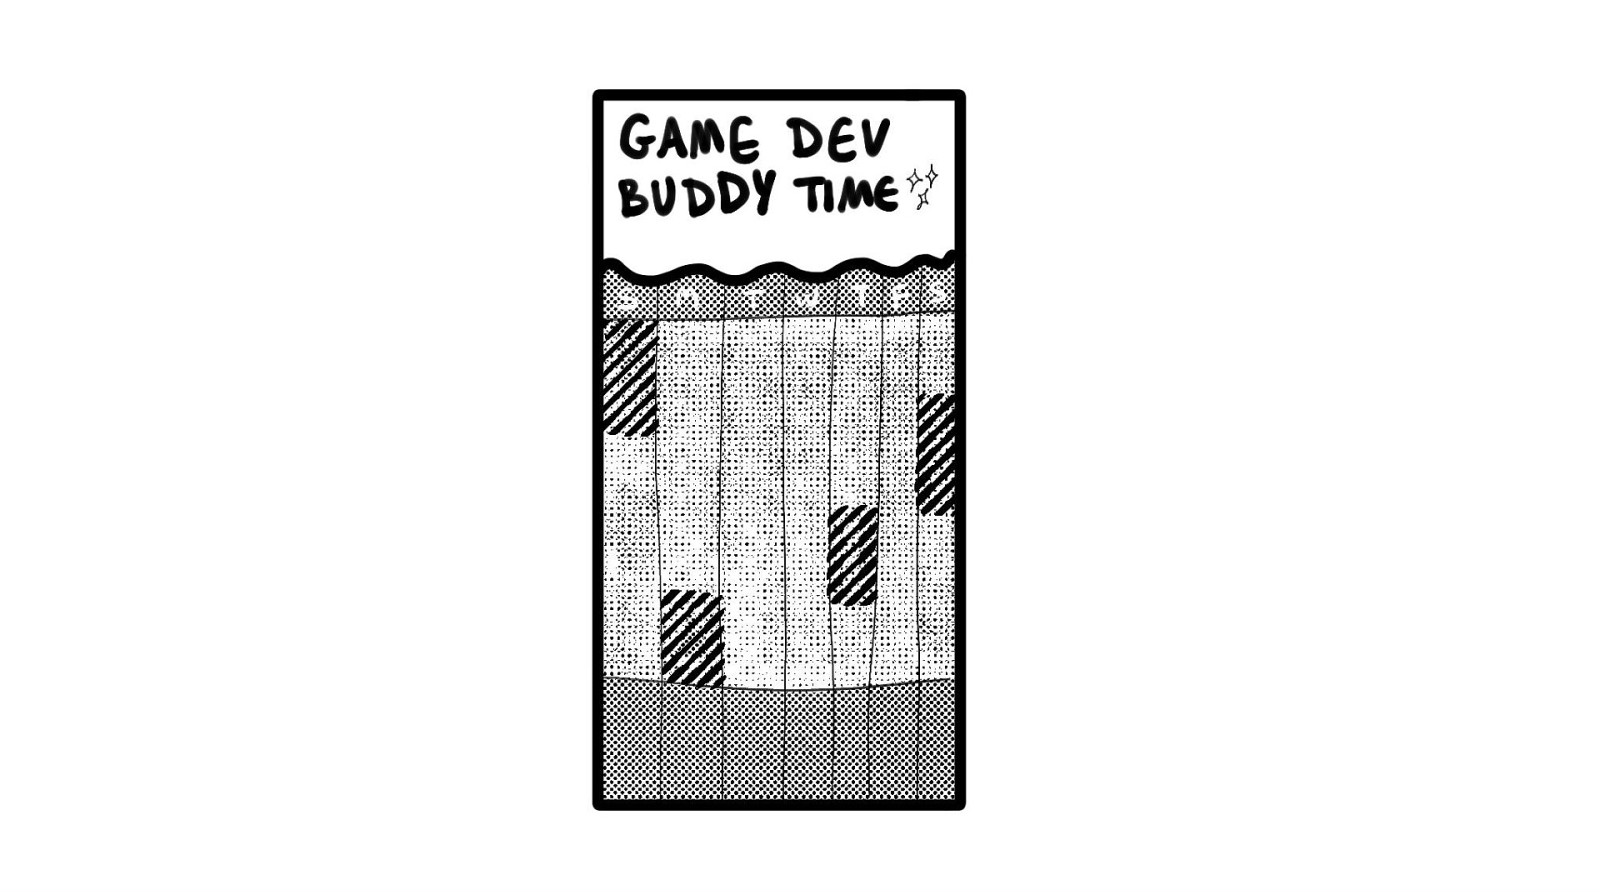 Adding game dev buddy time to my calendar helped me connect with friends and work on my game in a low-pressure environment.